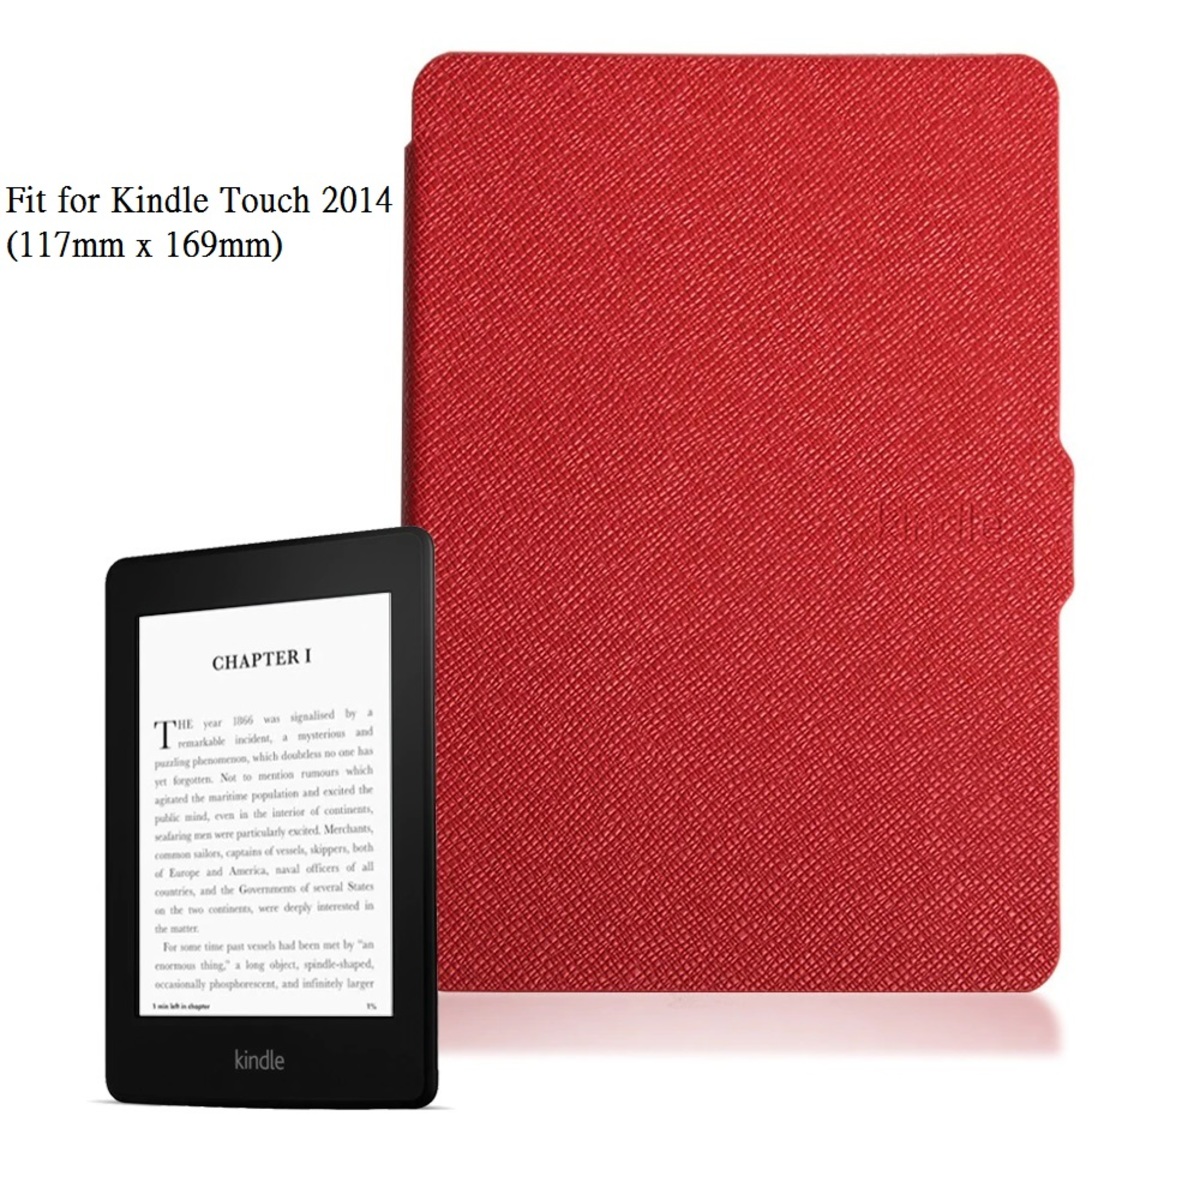 touch 2014 case (RED) for 2014 version (fit for 117mm x 169mm)